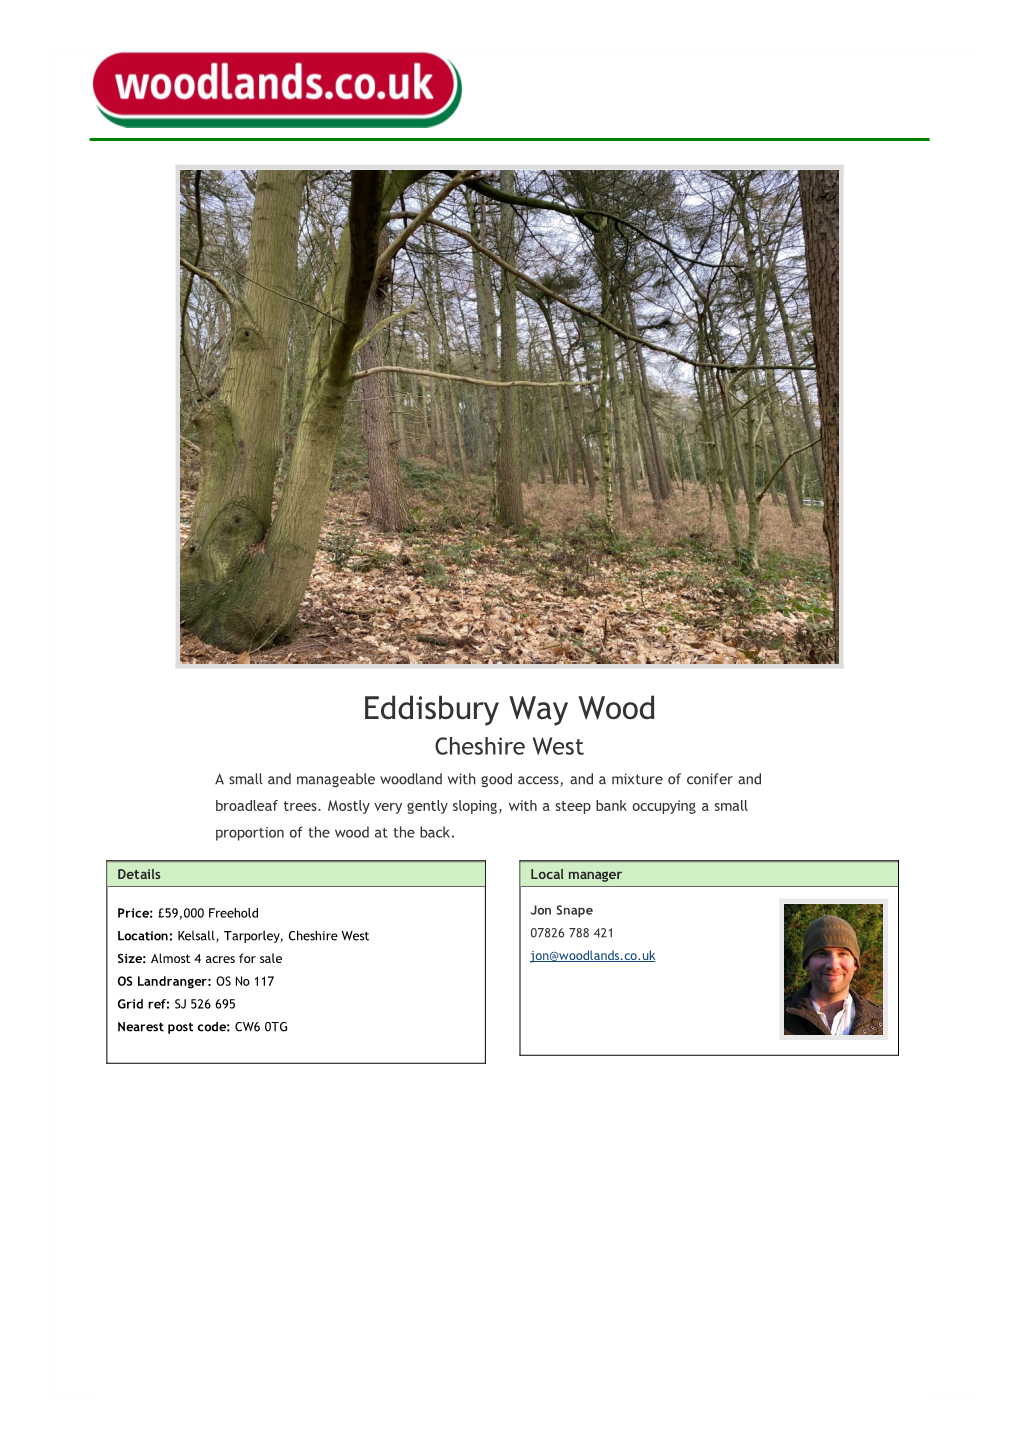 Eddisbury Way Wood Cheshire West a Small and Manageable Woodland with Good Access, and a Mixture of Conifer and Broadleaf Trees